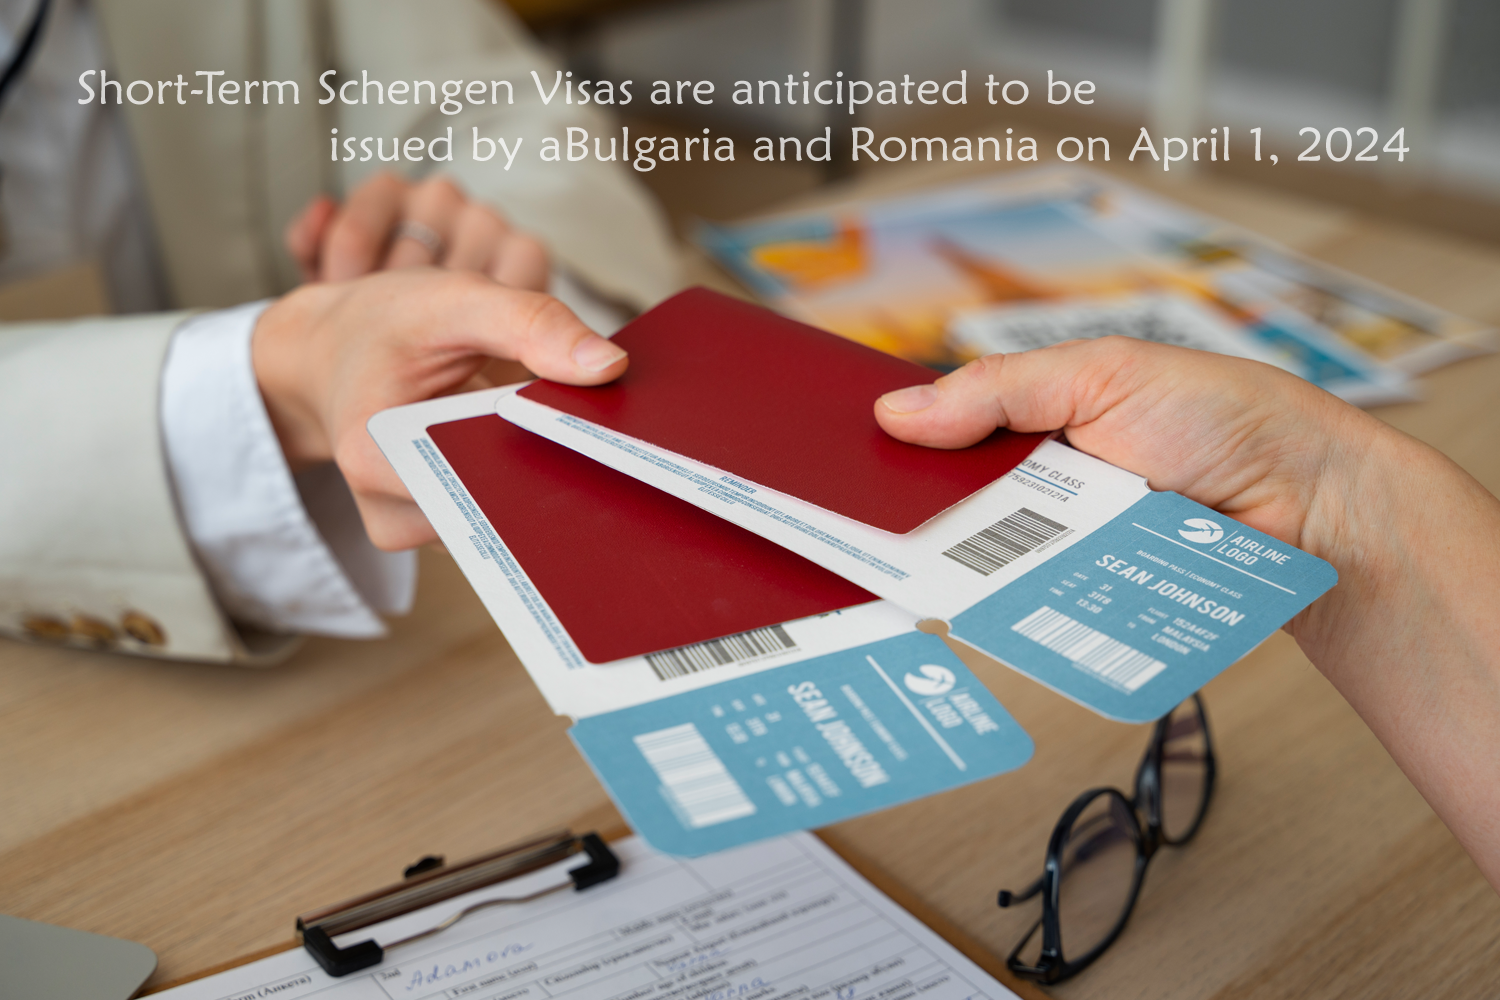 Short-Term Schengen Visas are anticipated to be issued by Bulgaria and Romania on April 1, 2024.